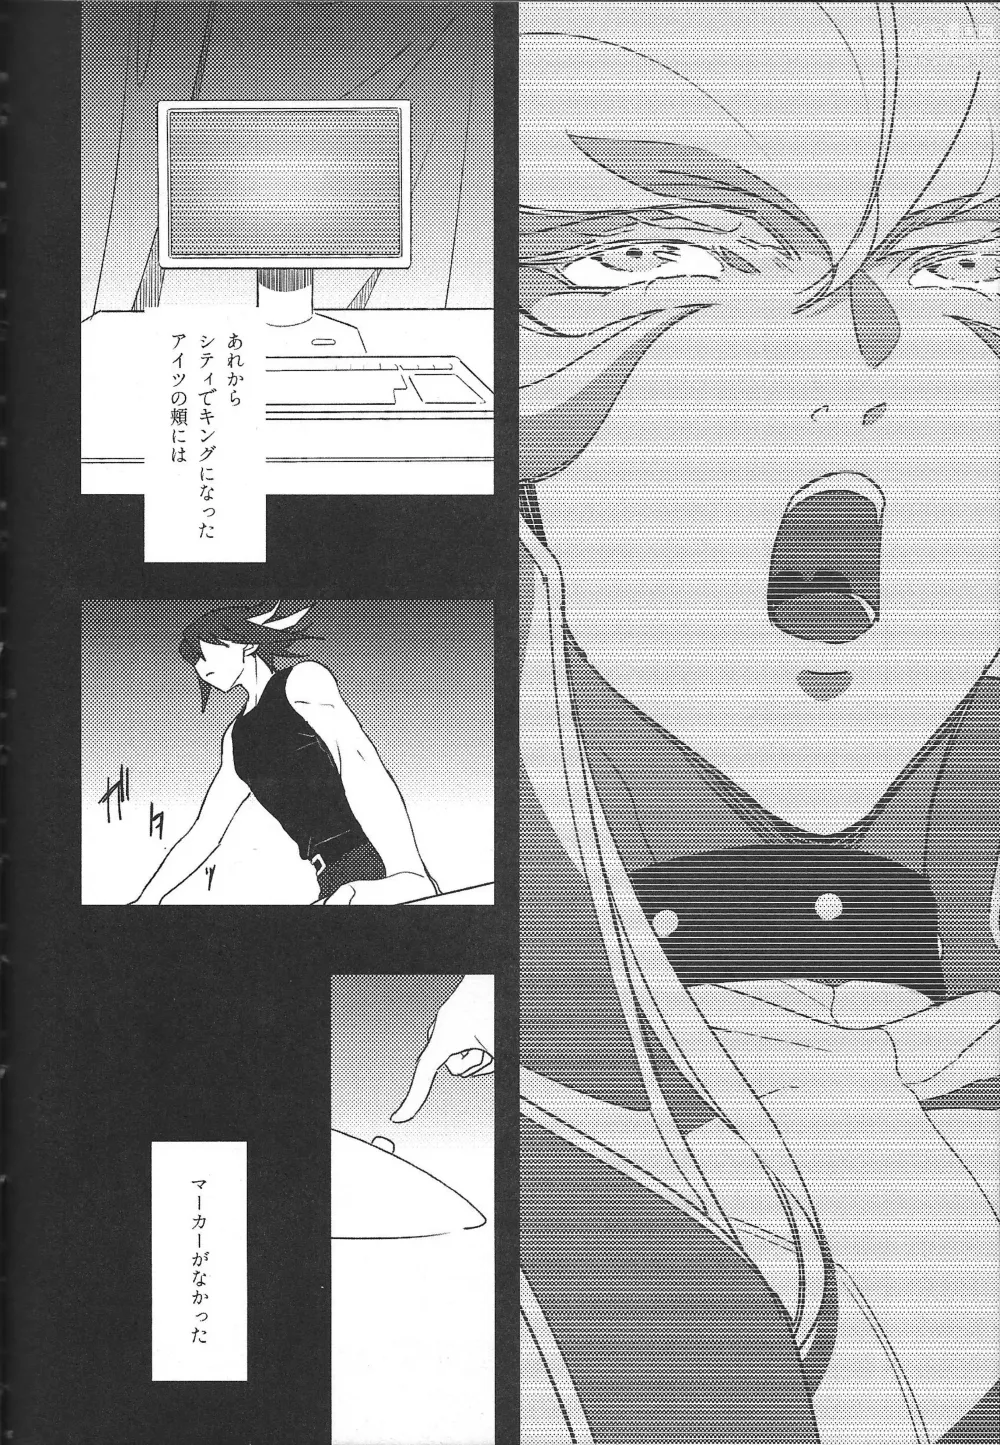 Page 133 of doujinshi Cherry, Virgin, Extra.